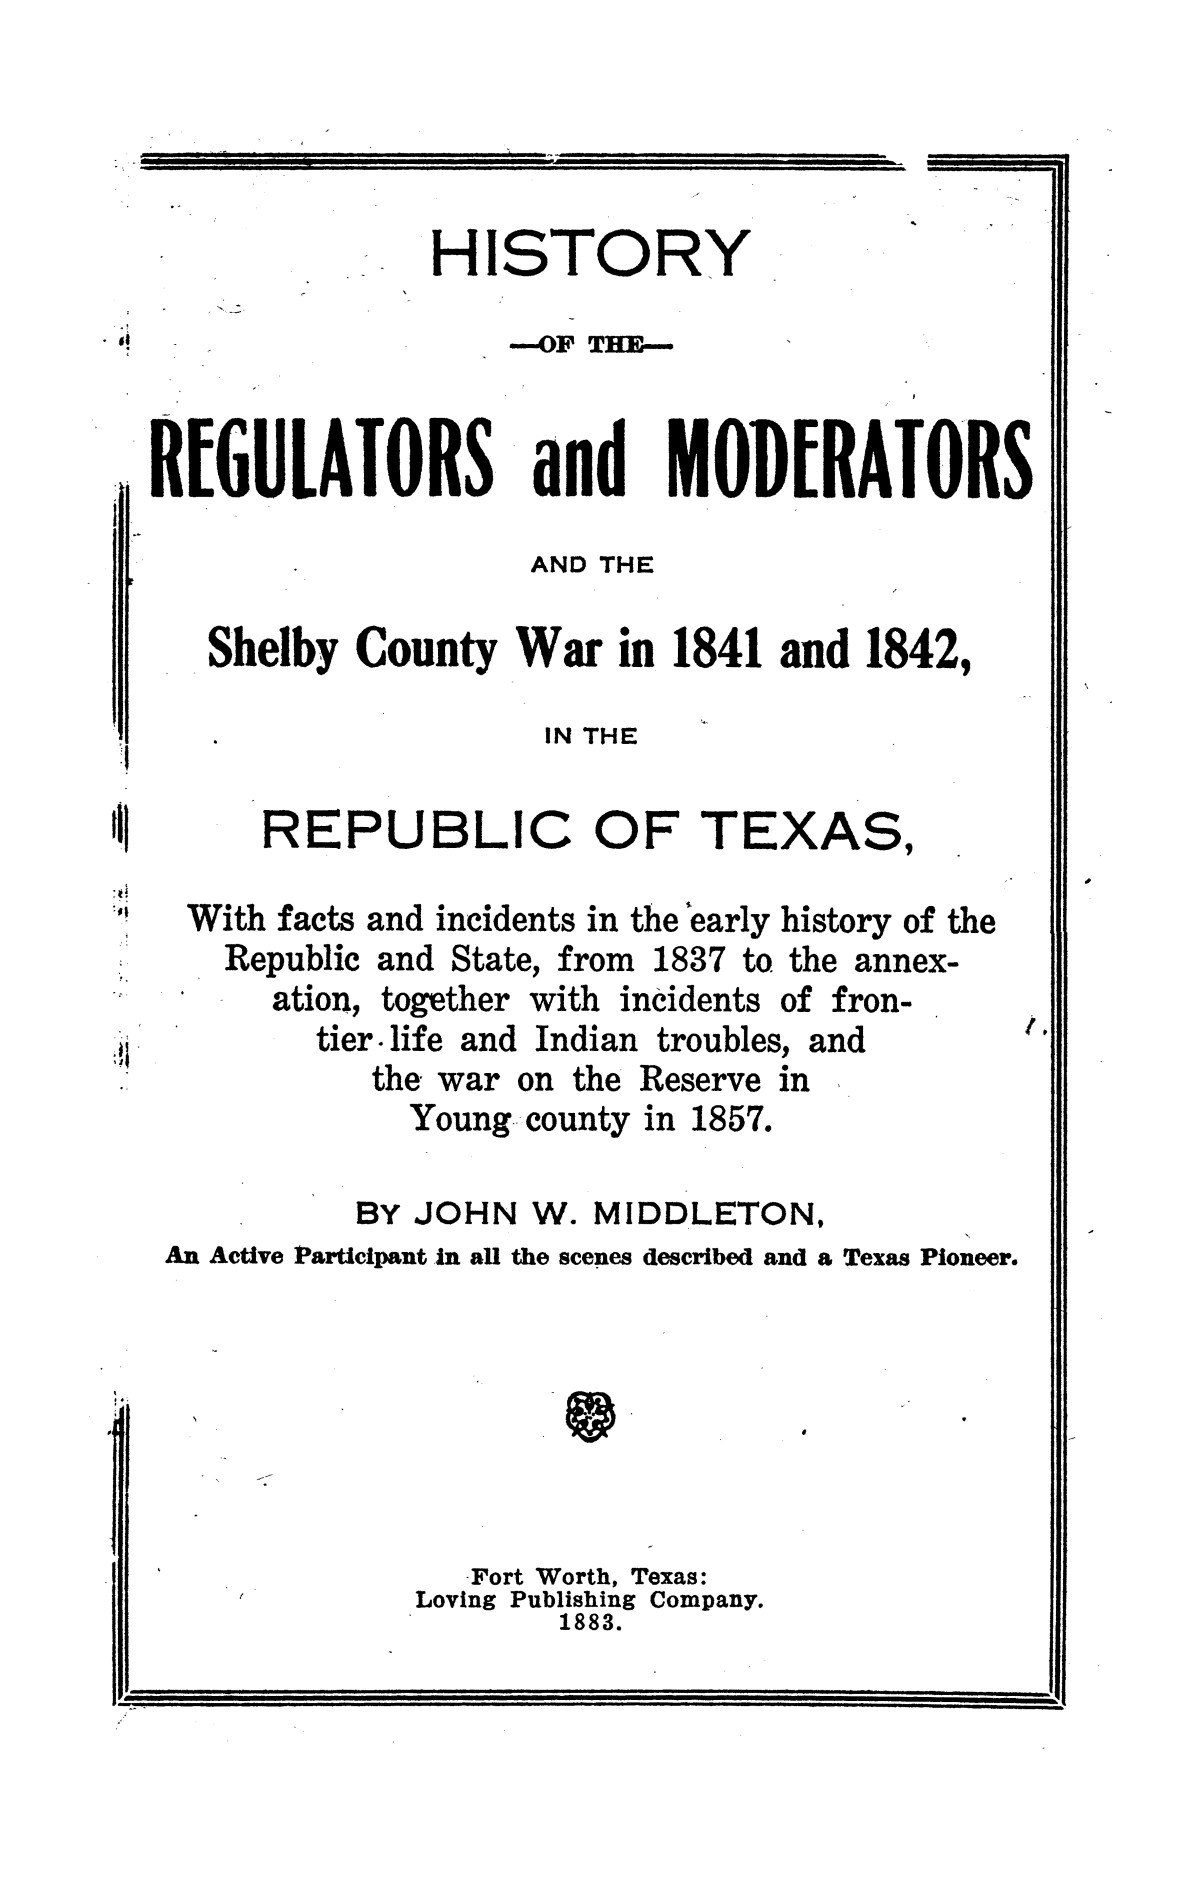 History of the regulators and moderators and the Shelby County war in 1841 and 1842, in the republic of Texas, with facts and incidents in the early history of the republic and state, from 1837 to the annexation, together with incidents of frontier life and Indian troubles, and the war on the reserve in Young County in 1857
                                                
                                                    [Sequence #]: 1 of 42
                                                